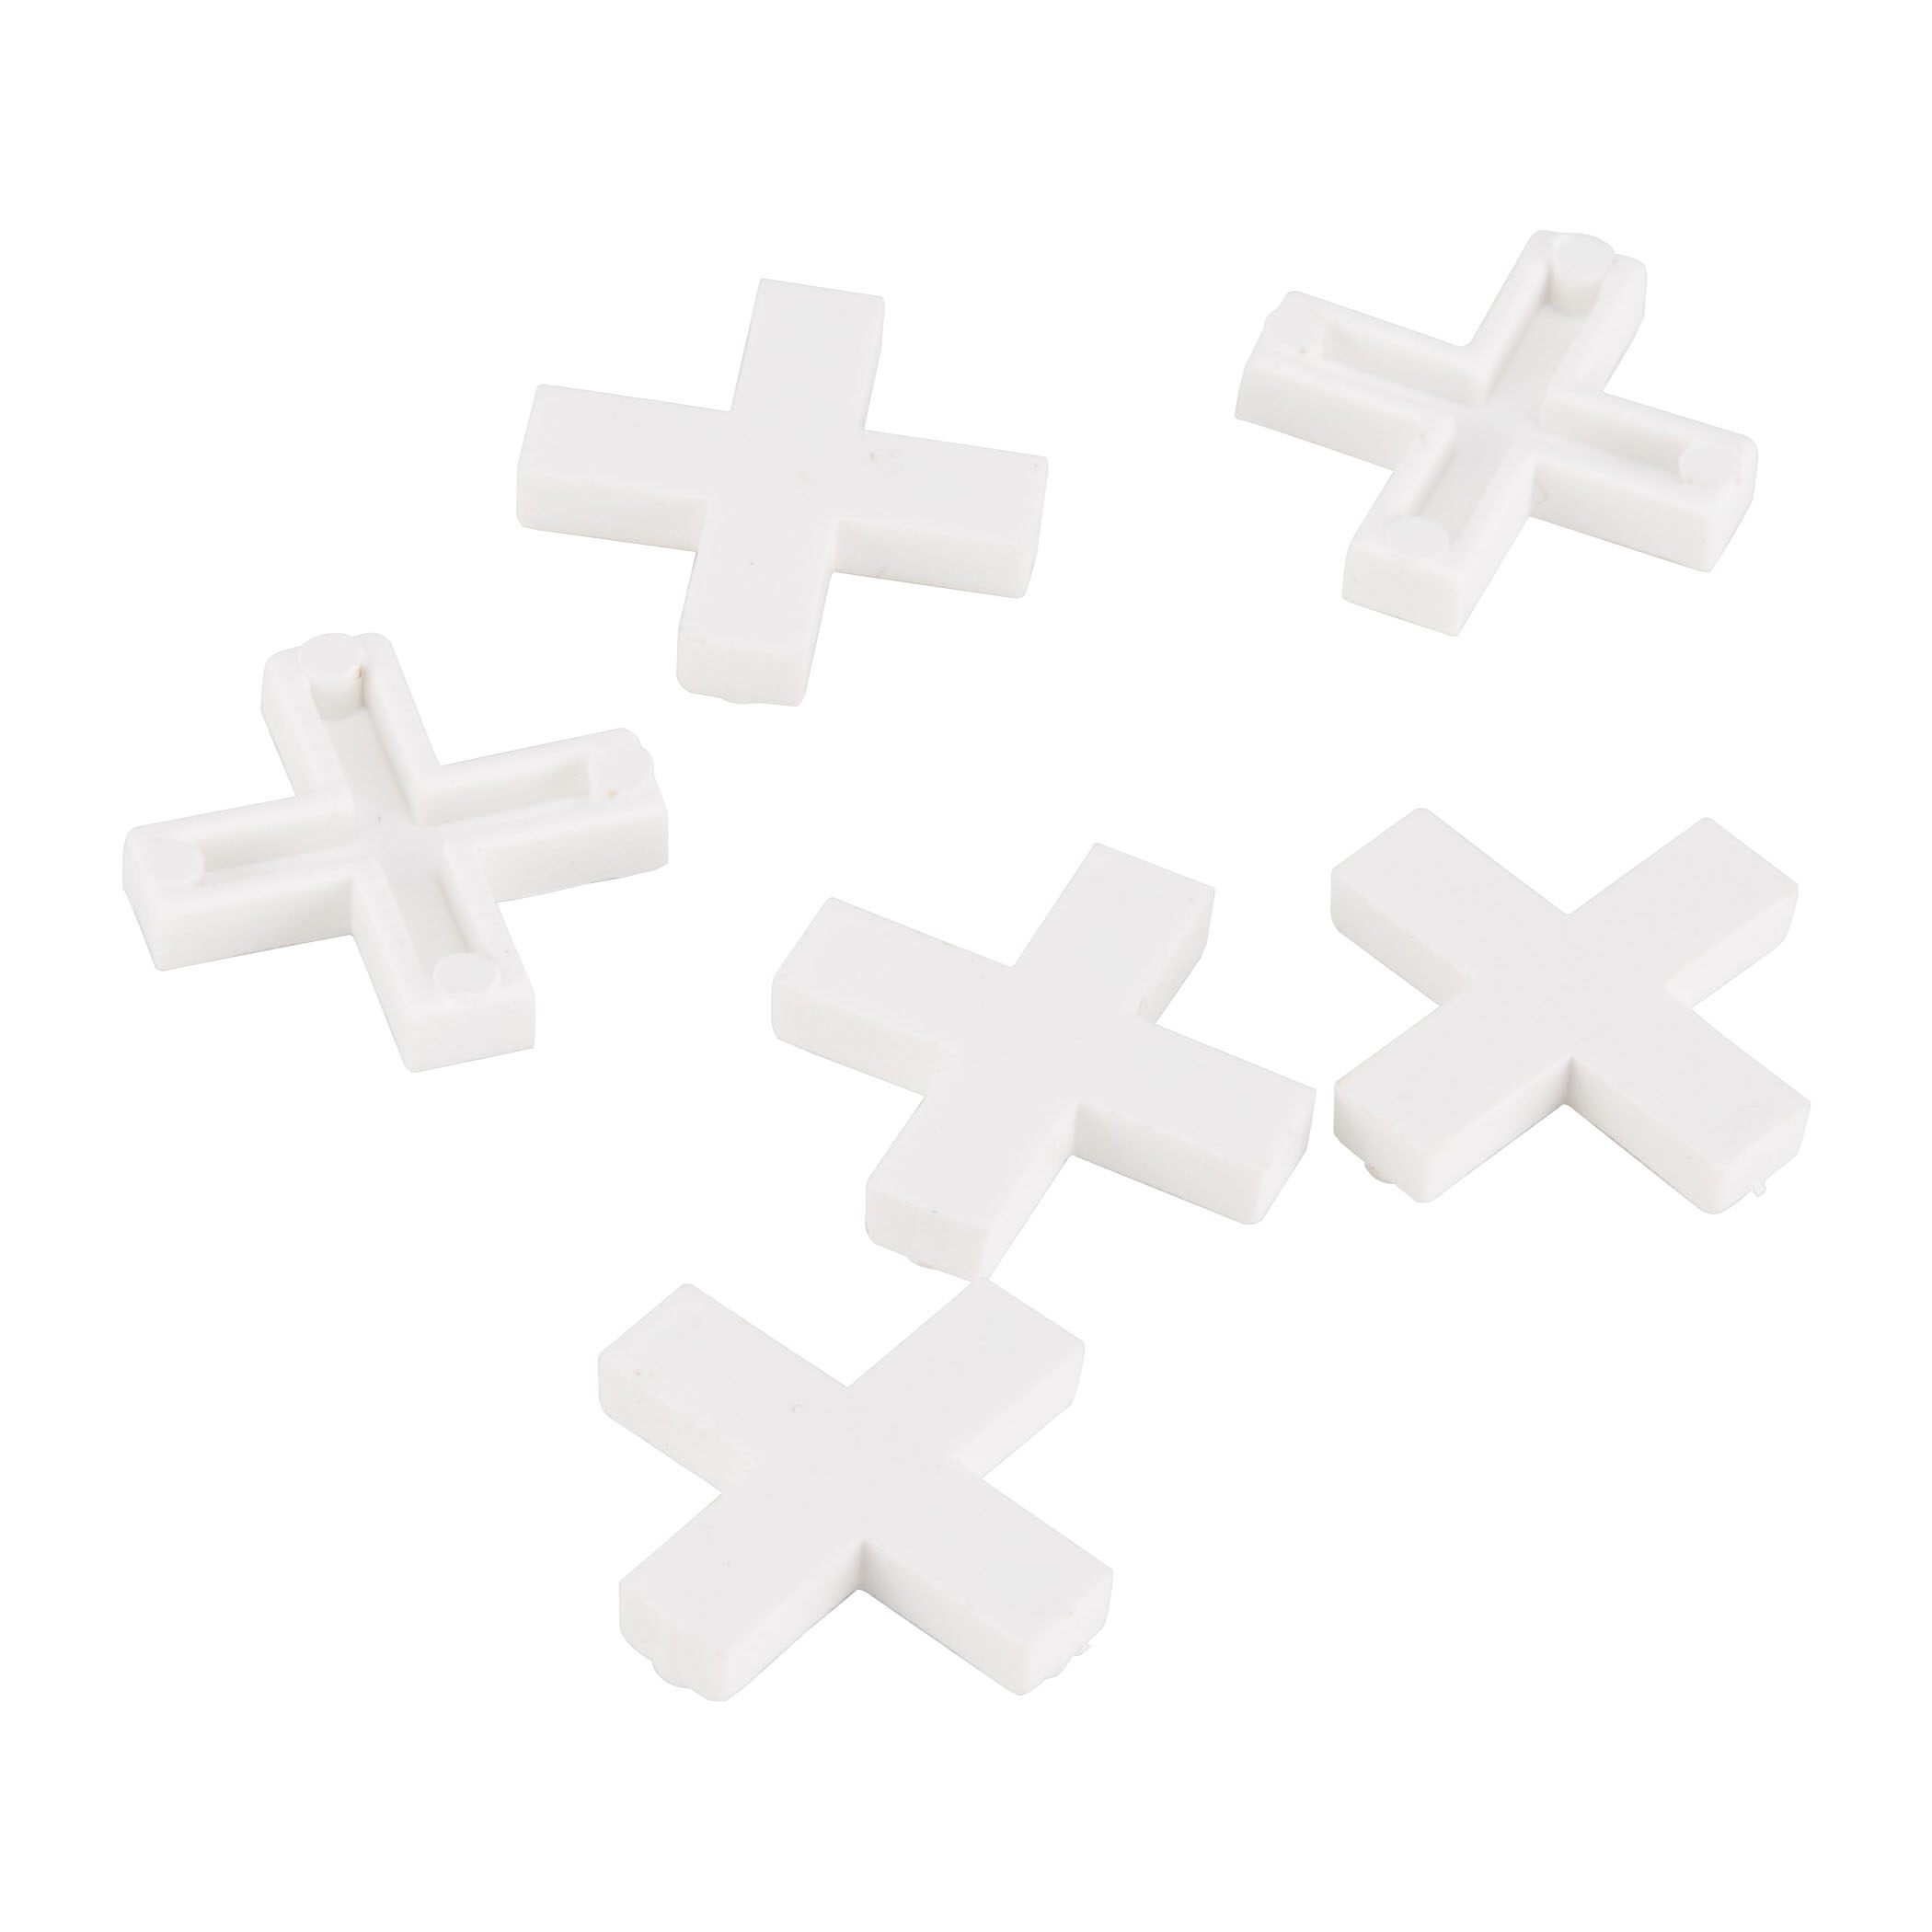 MJ-T80806-3L Tile Spacer, 3/8 in Thick, Cross, Plastic